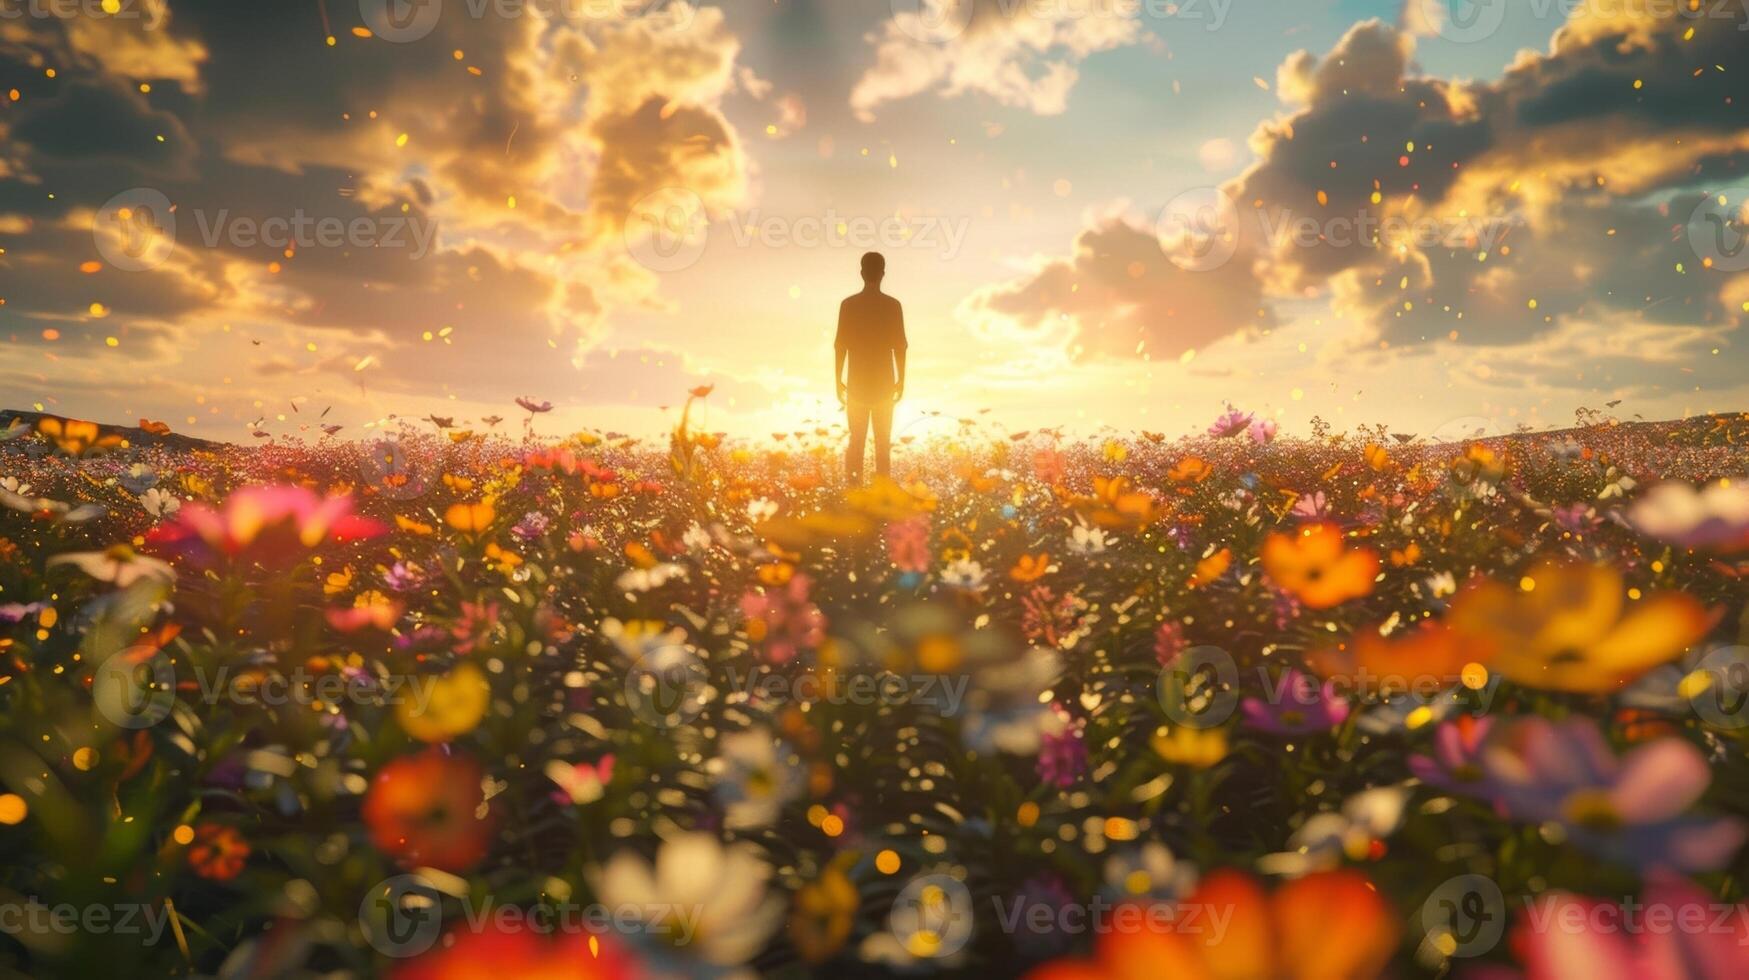 A person stands amidst a field of blooming flowers representing their flourishing immune system. photo